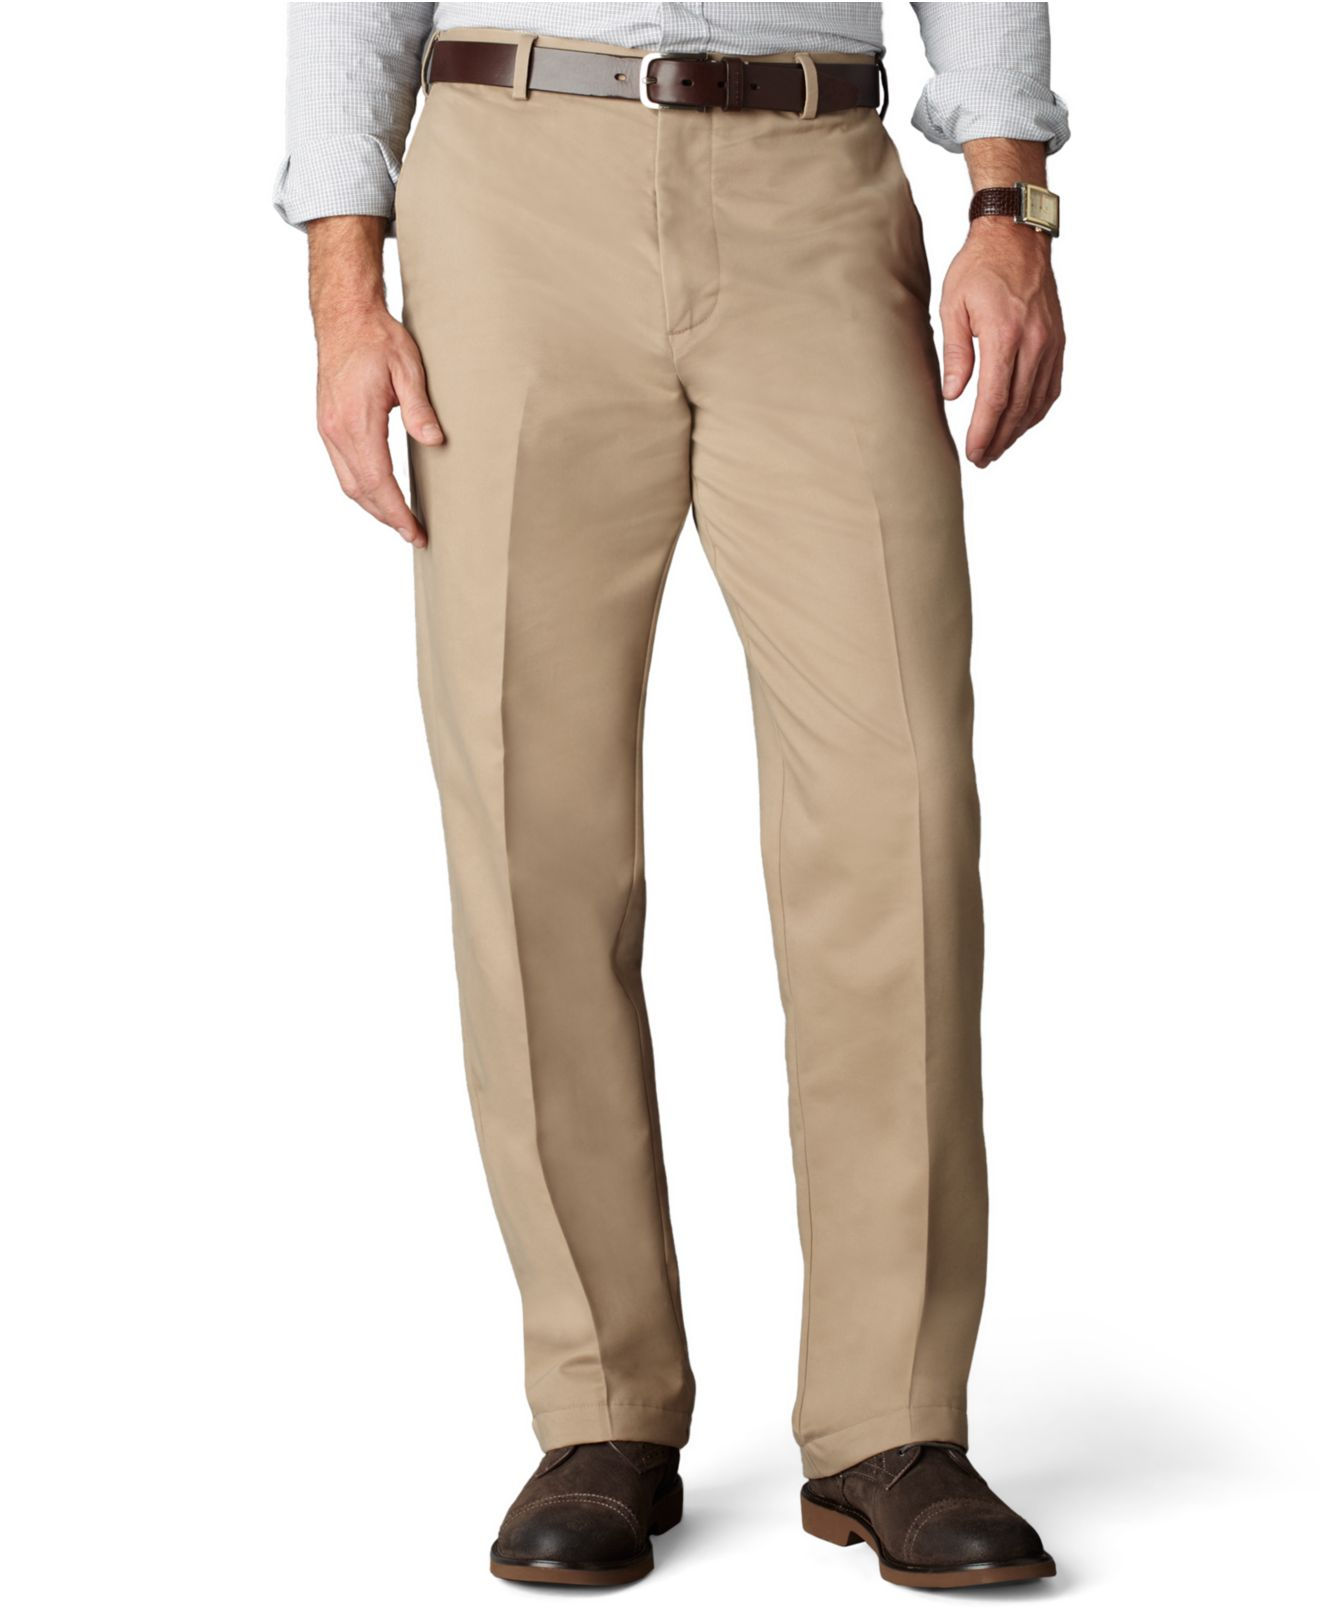 Lyst - Dockers D4 Relaxed Fit Comfort Khaki Flat Front Pants in Natural ...